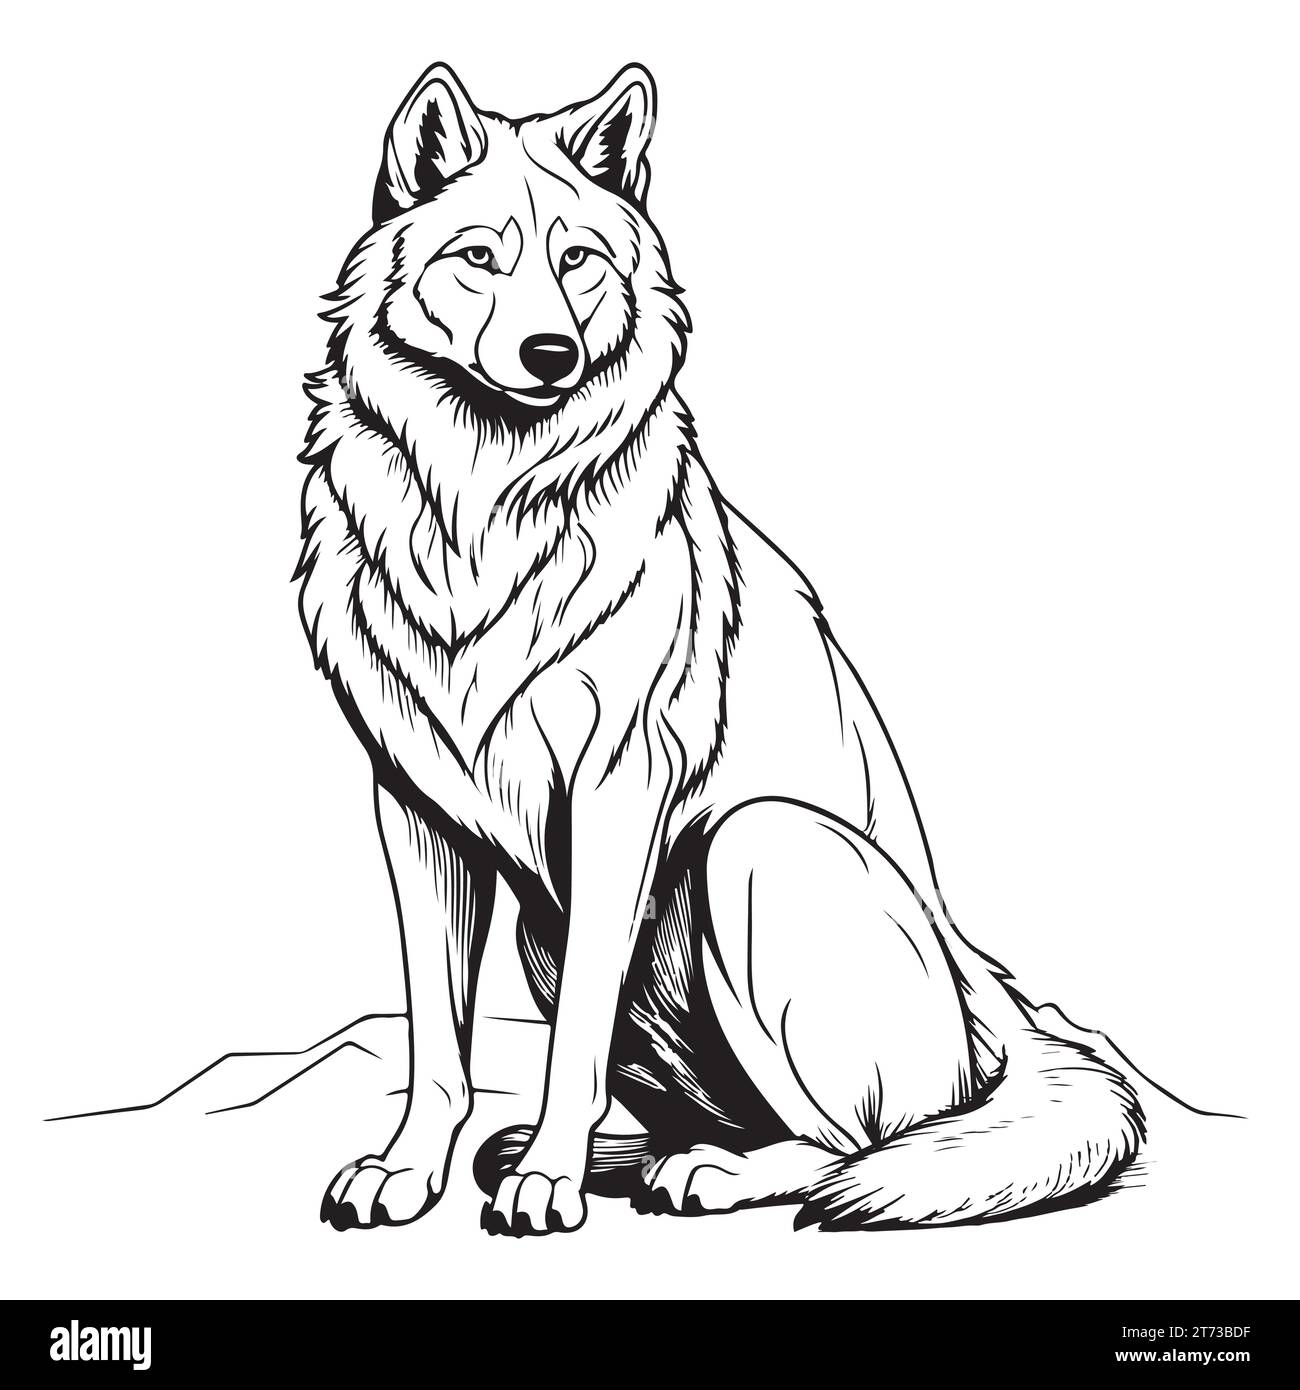 Wolf sitting sketch hand drawn in doodle style Vector illustration Stock Vector